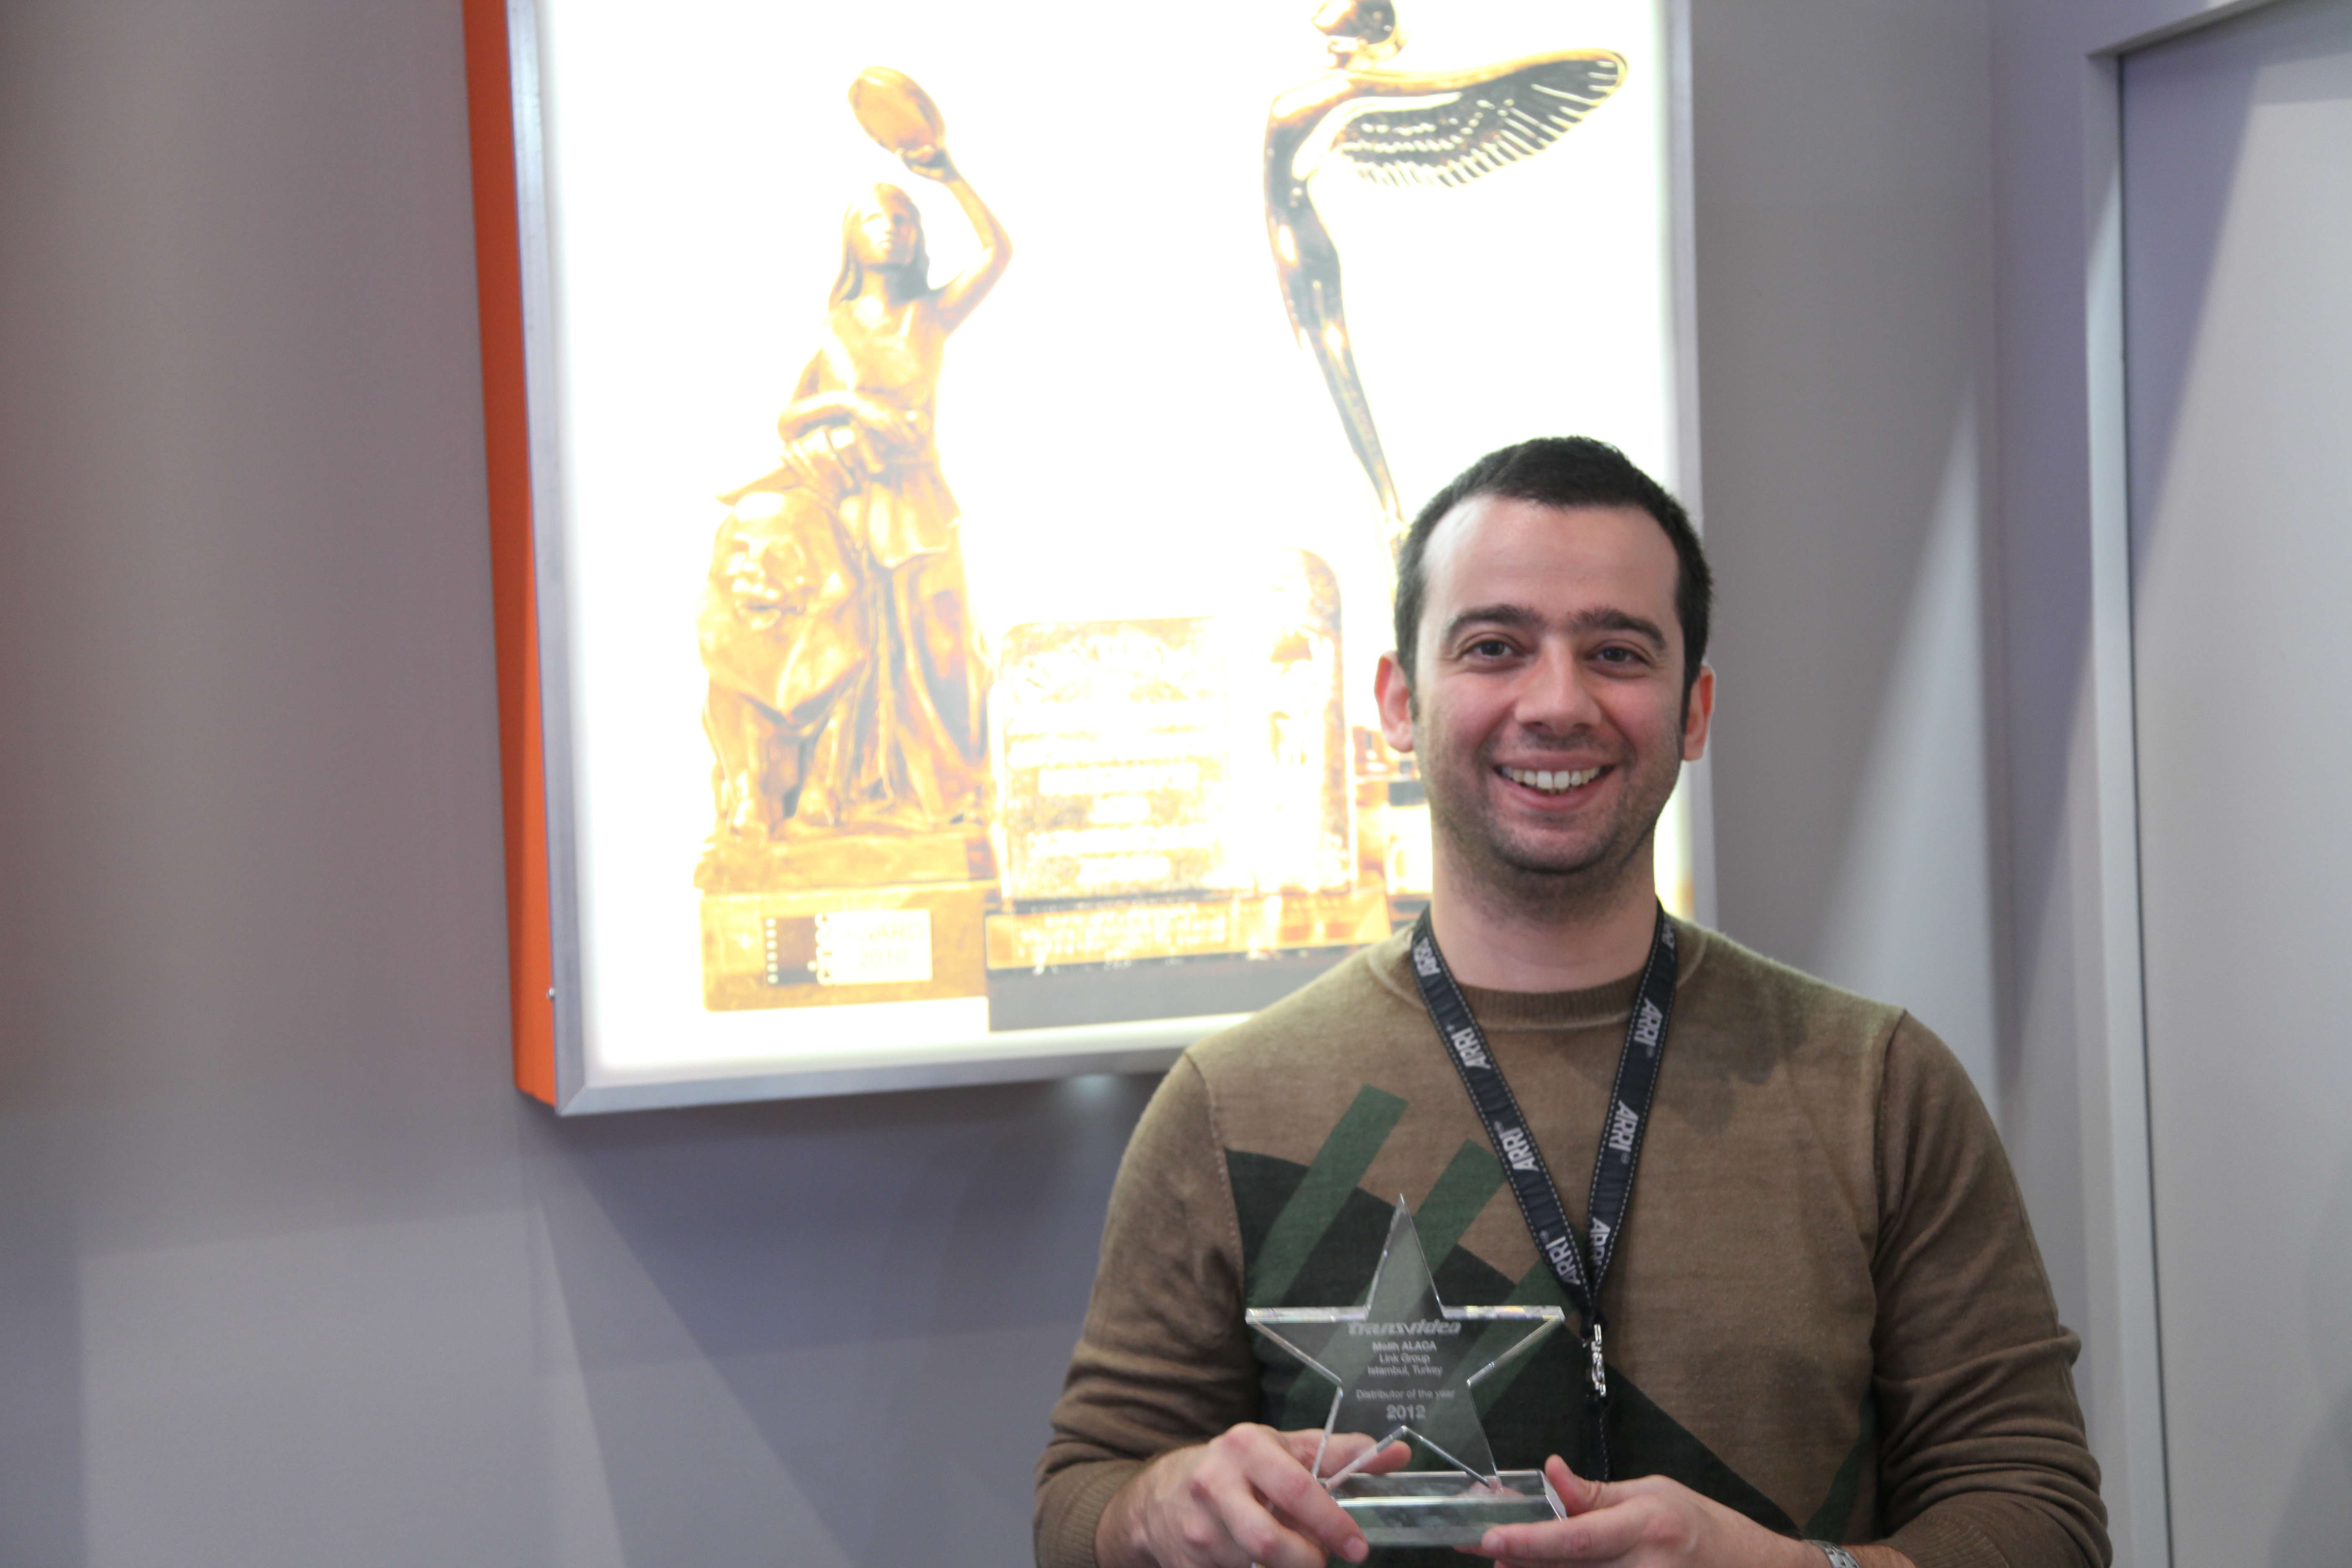 Melih ALACA received the DIstributor of the Year Award from TRANSVIDEO